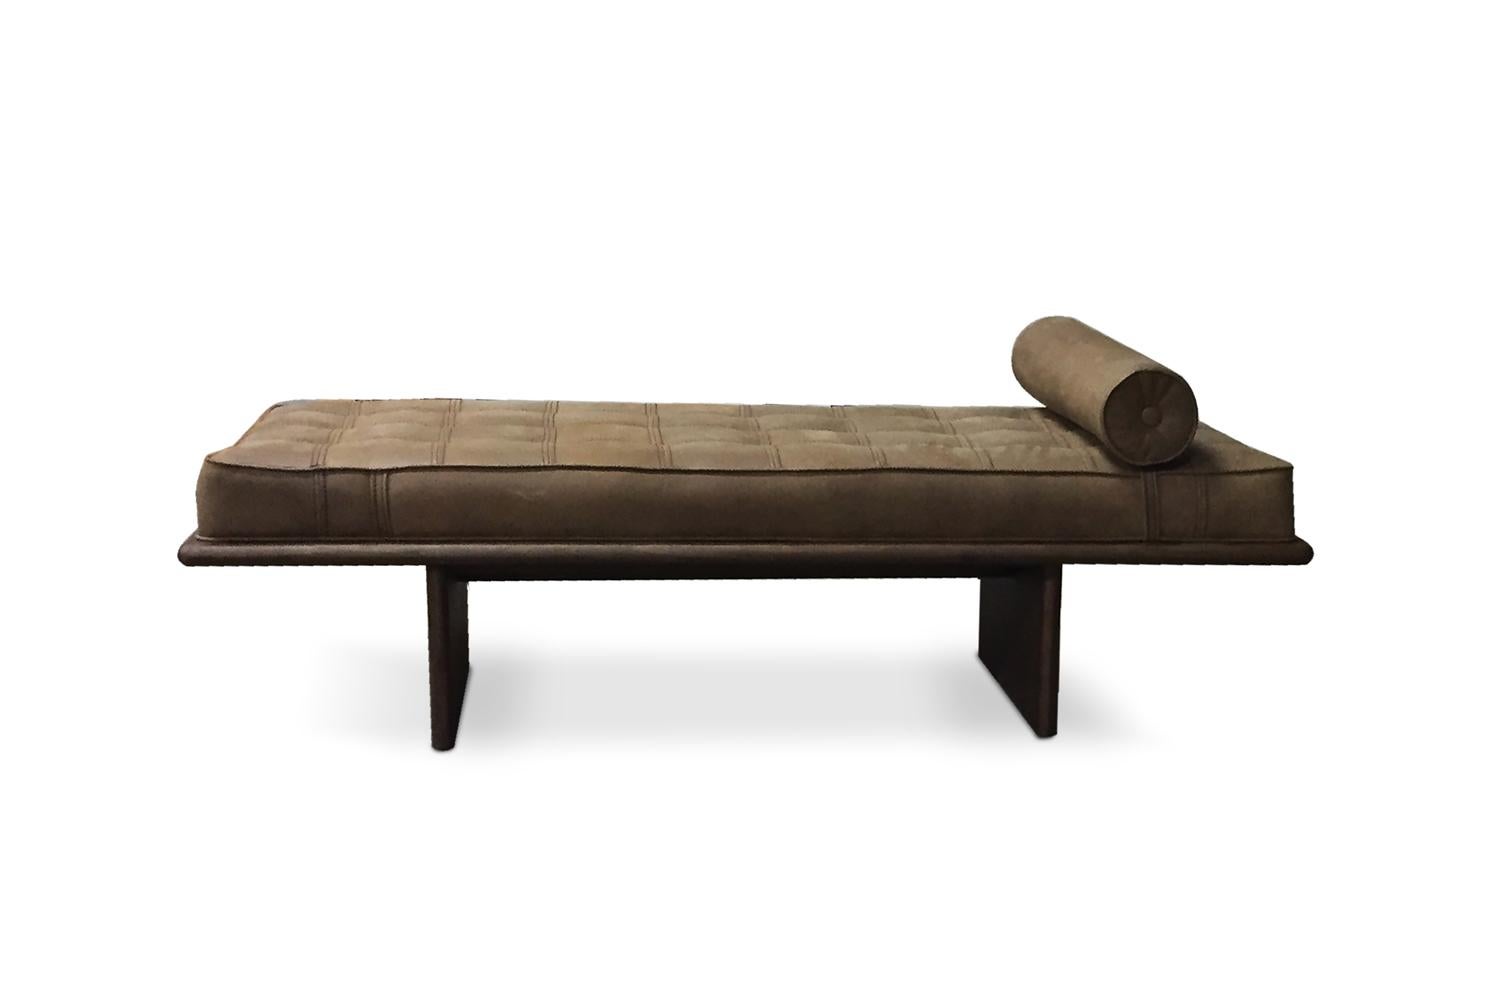 Frederic daybed by Collector
Materials: Structure in solid oak wood. Upholstered in genuine Sequoia 4003 leather
Dimensions: W 190 x D 90 x H 50 cm 

Frederic daybed it’s inspired by Japanese minimalism. With simple and clean structure, combined